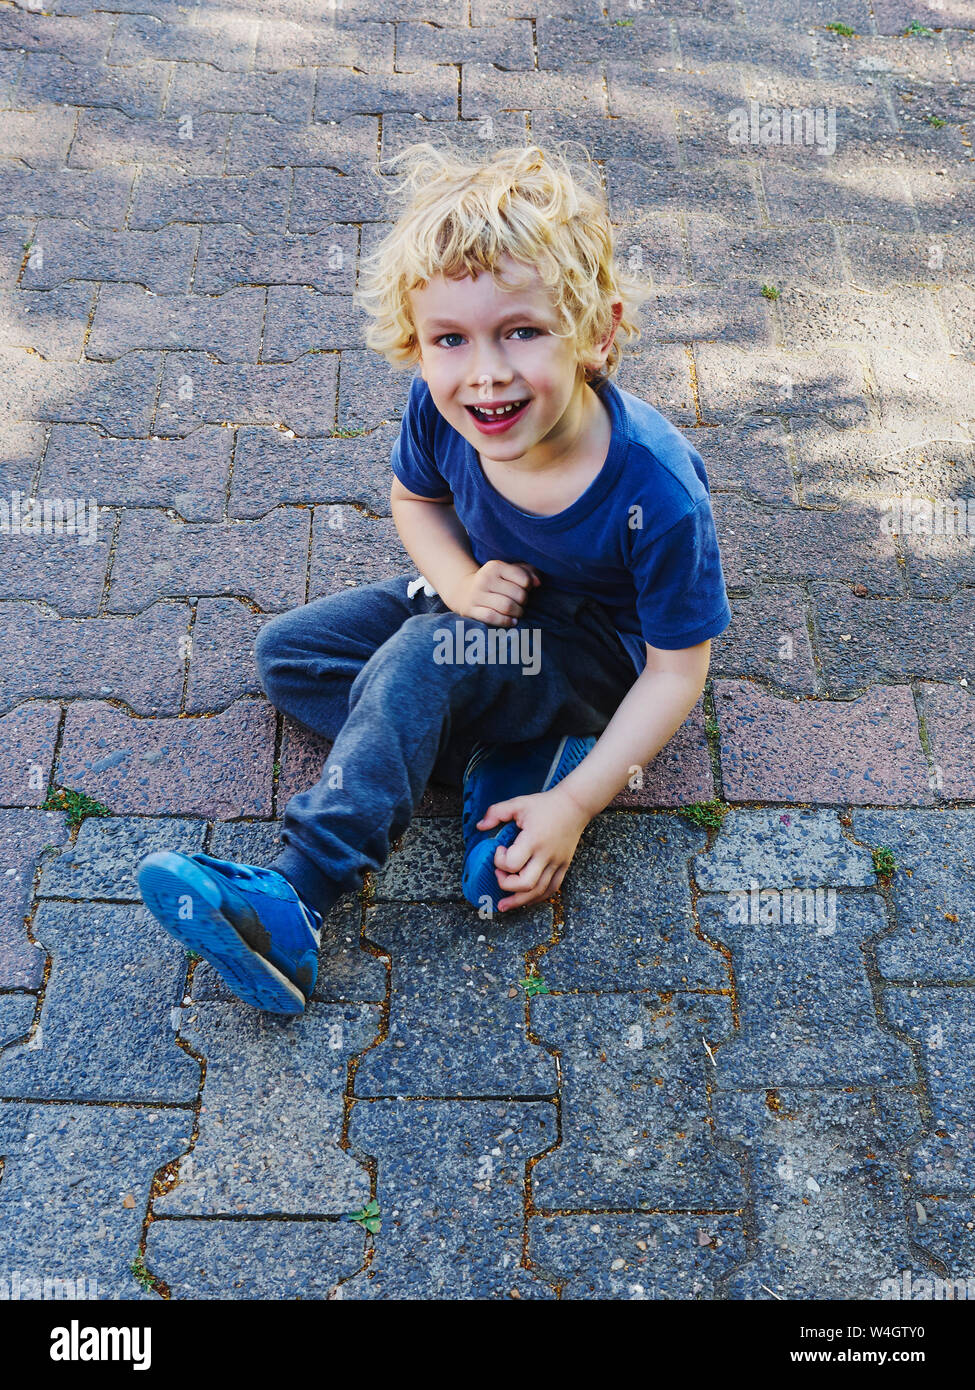 Portrait of smiling little boy dressed in blue sitting on pavement Stock Photo